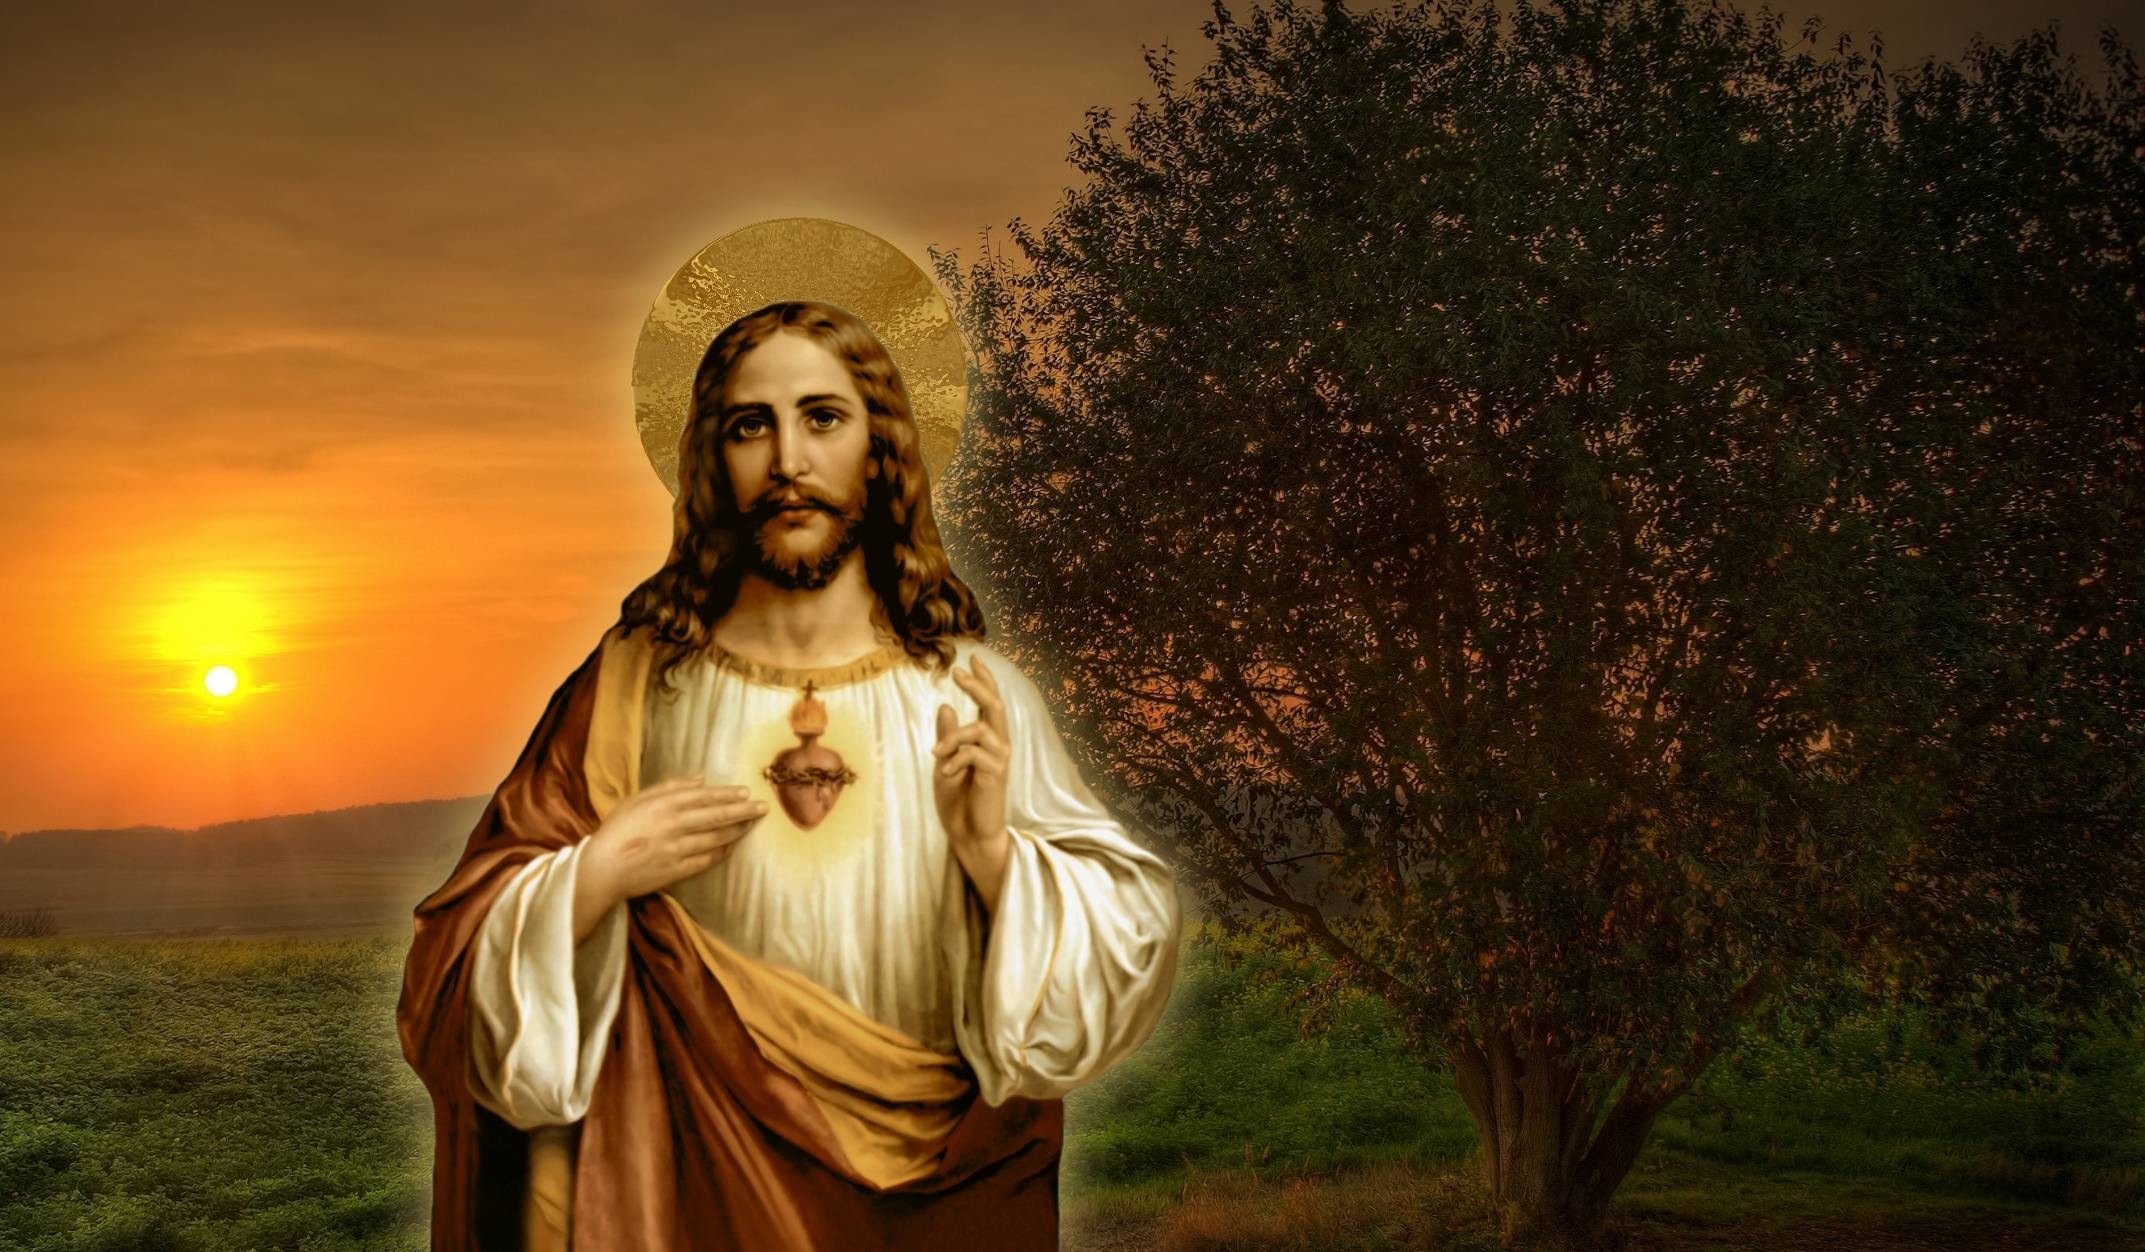 2145x1252 1920x1230 jesus-christ-wallpaper-picture-with-bible-verses-18